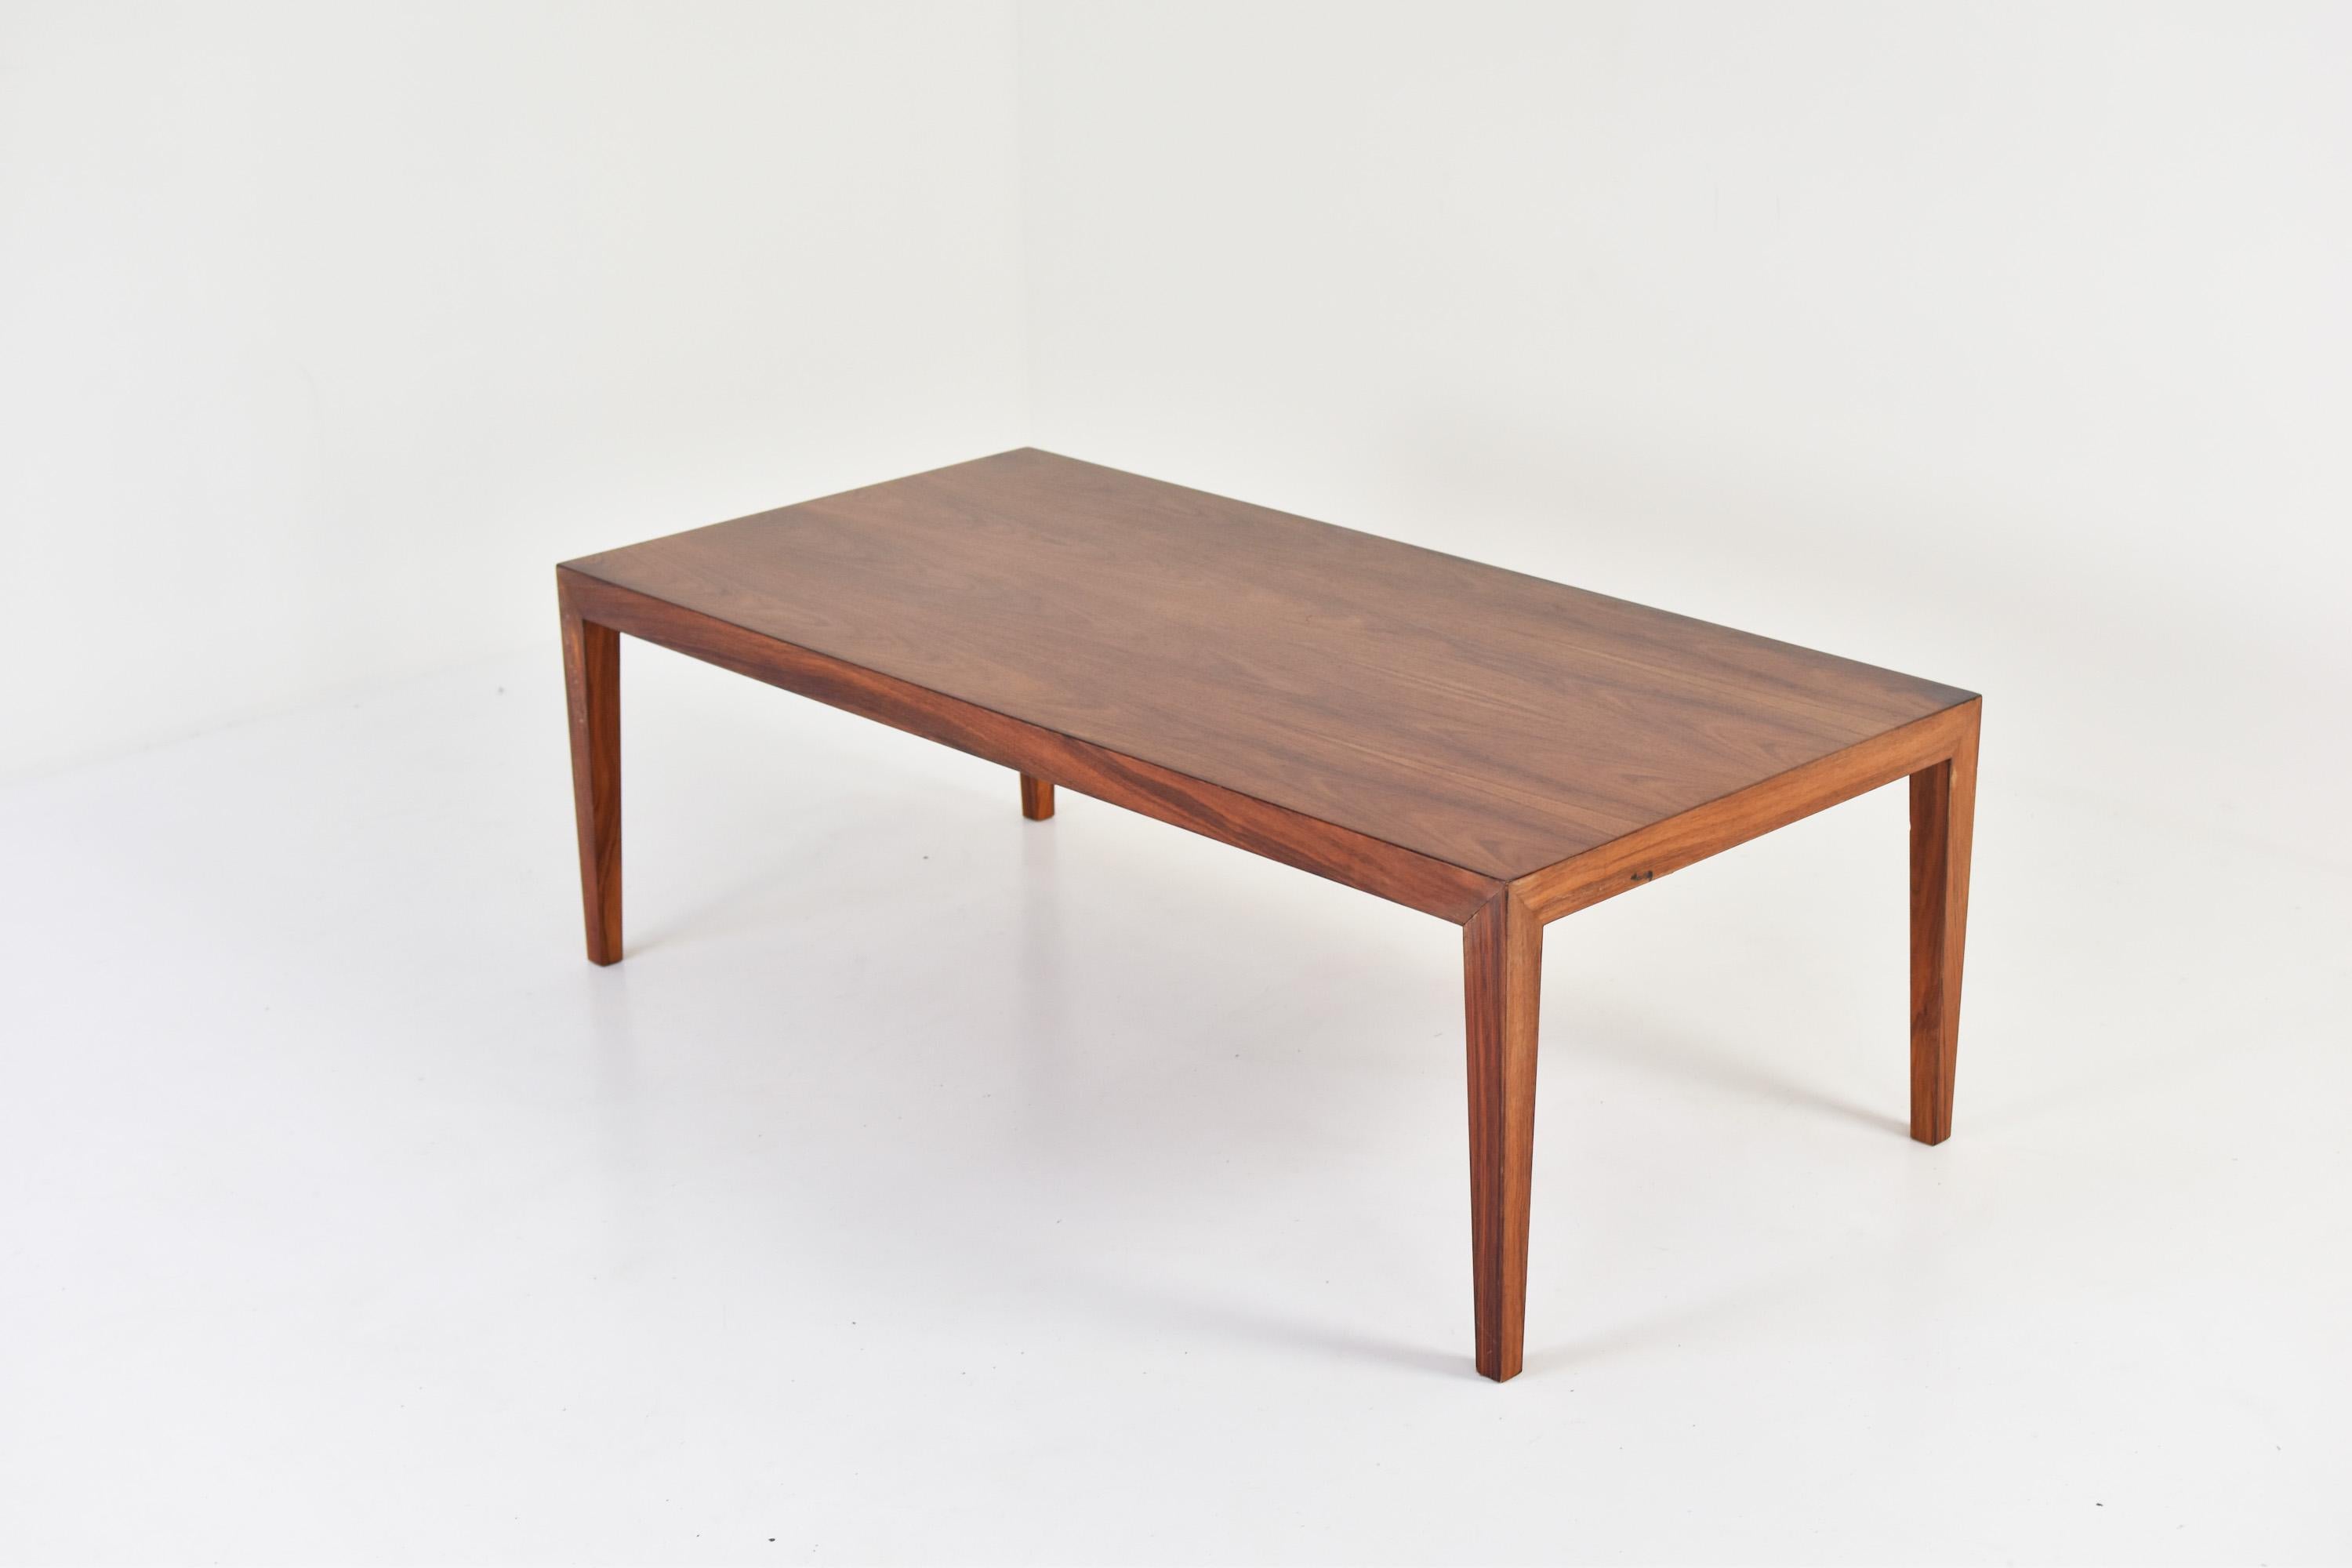 Rosewood coffee table by Severin Hansen for Haslev, Denmark, 1960s. This rectangular coffee table has a superb grain on the rosewood top. Labeled underneath.